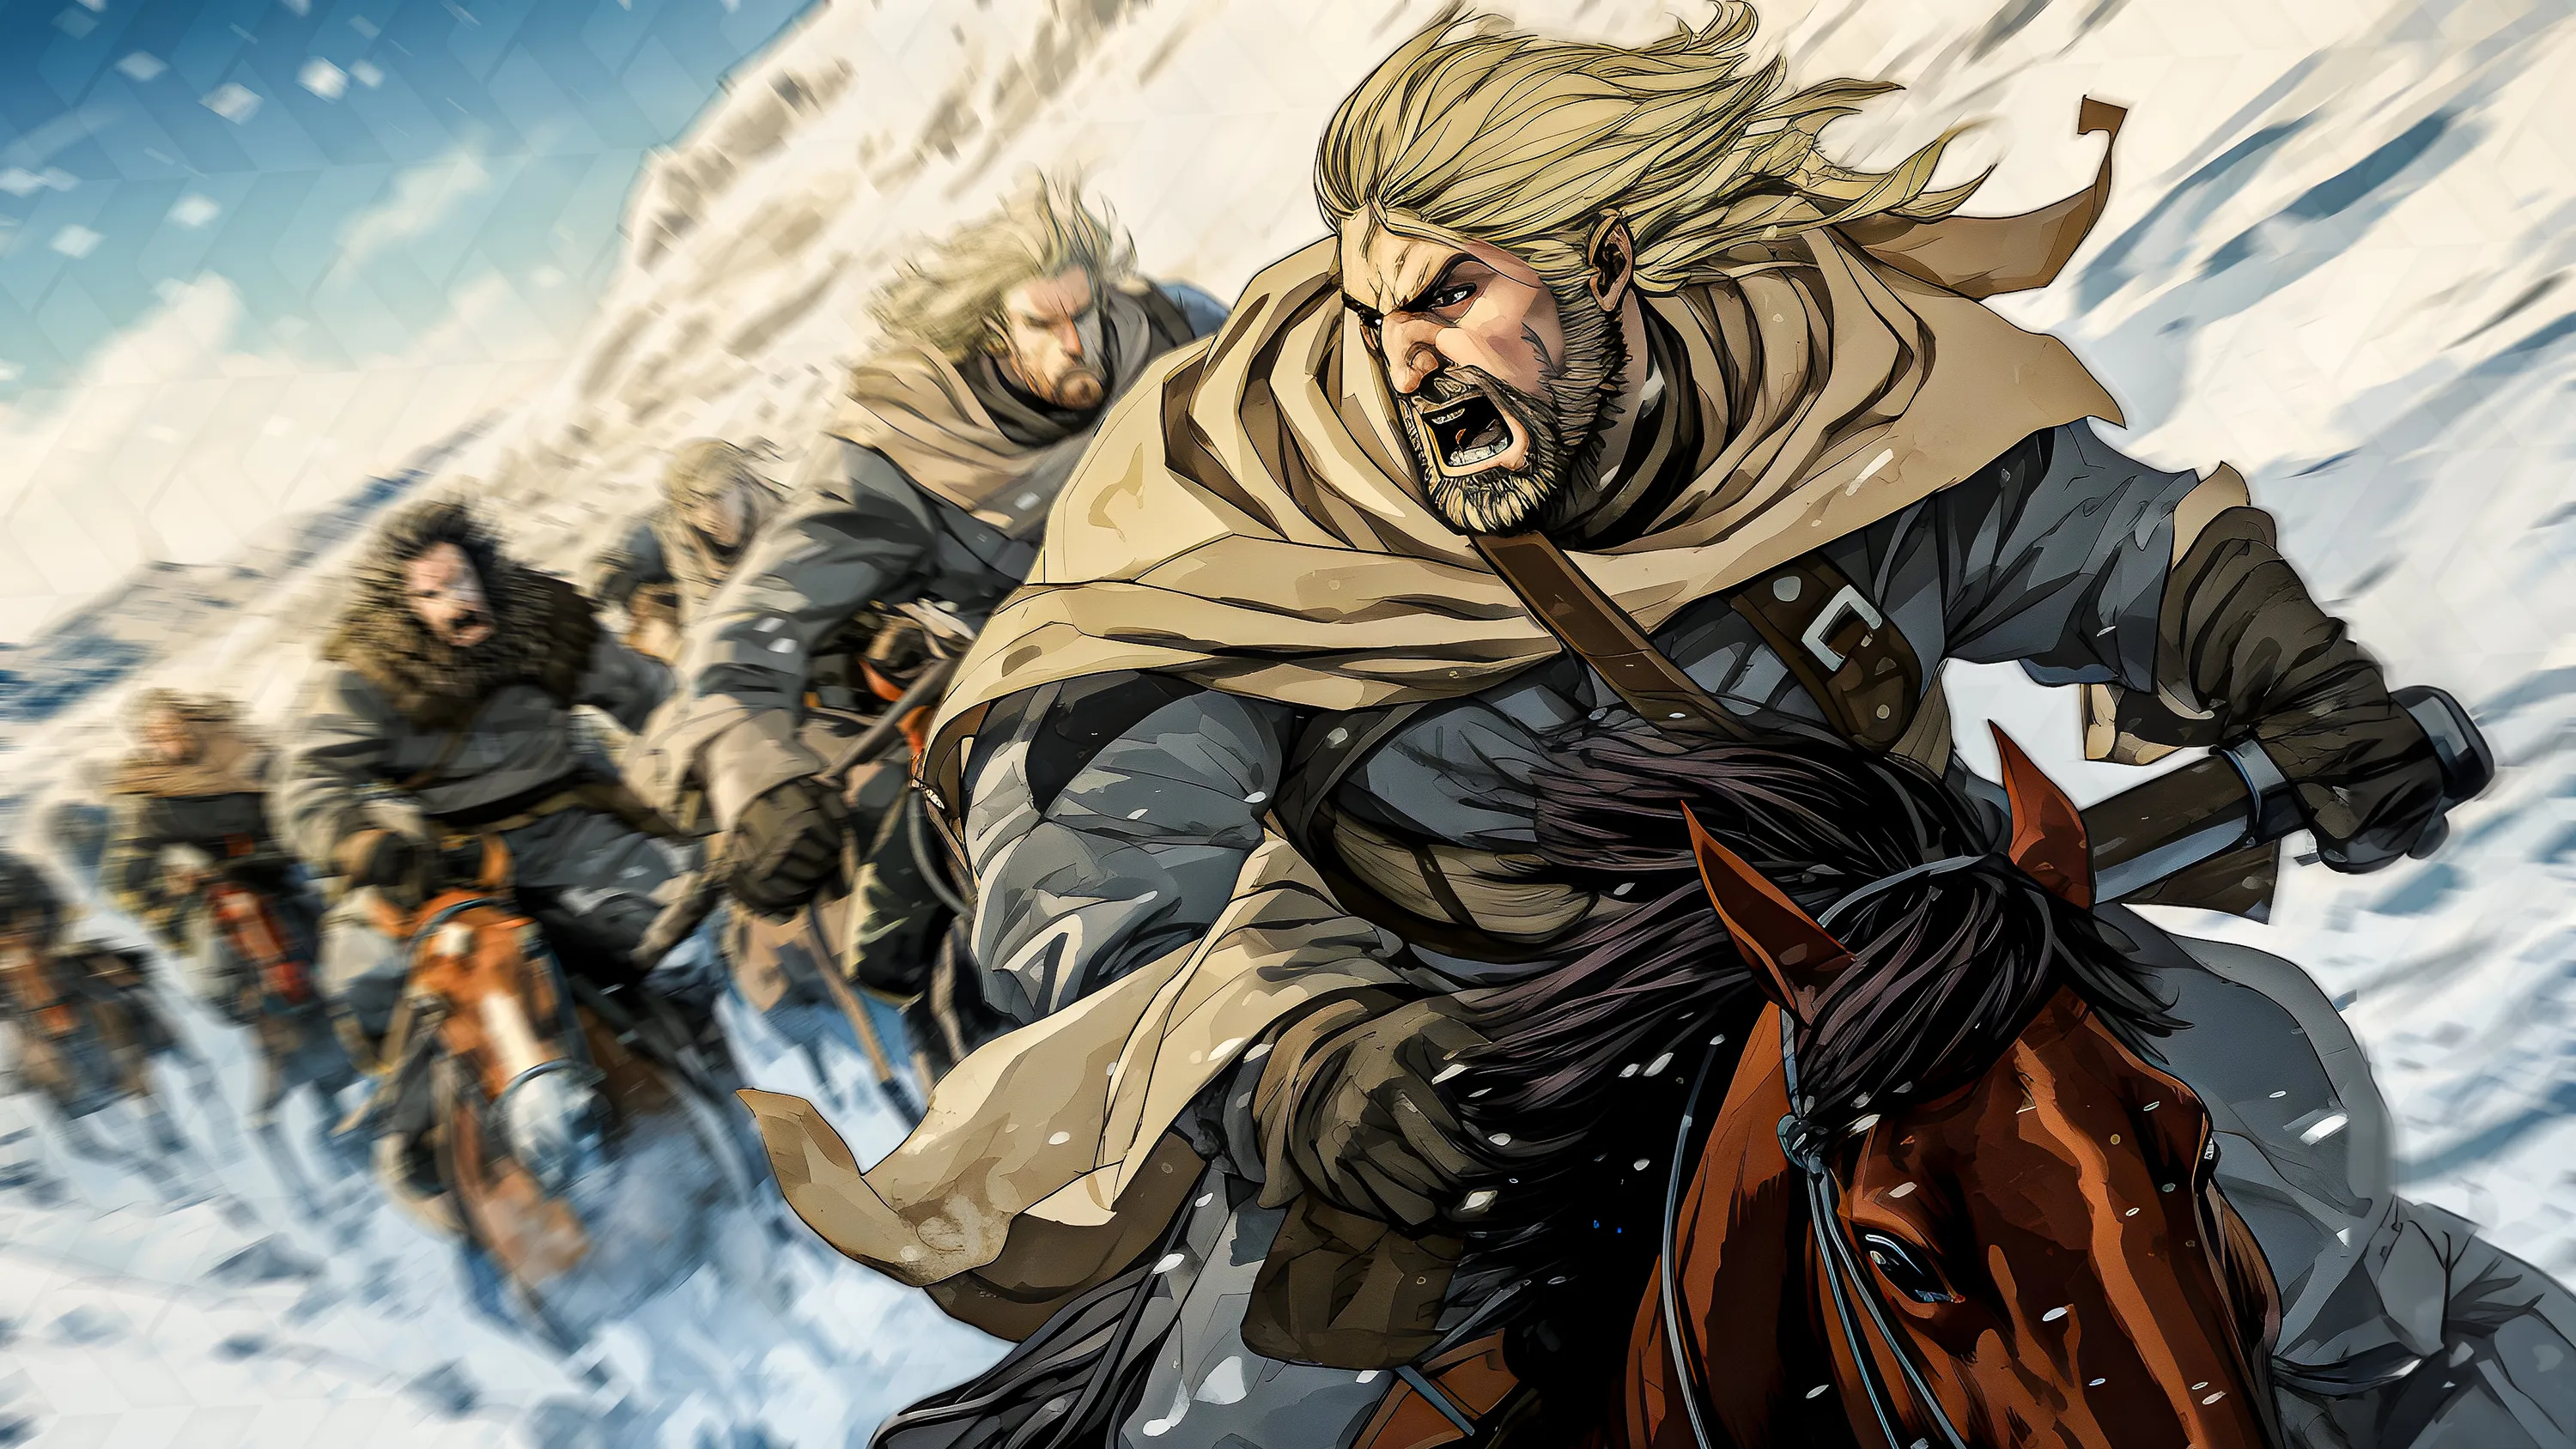 War Of The Rohirrim Explained: What Lord Of The Rings' Anime Movie Is About